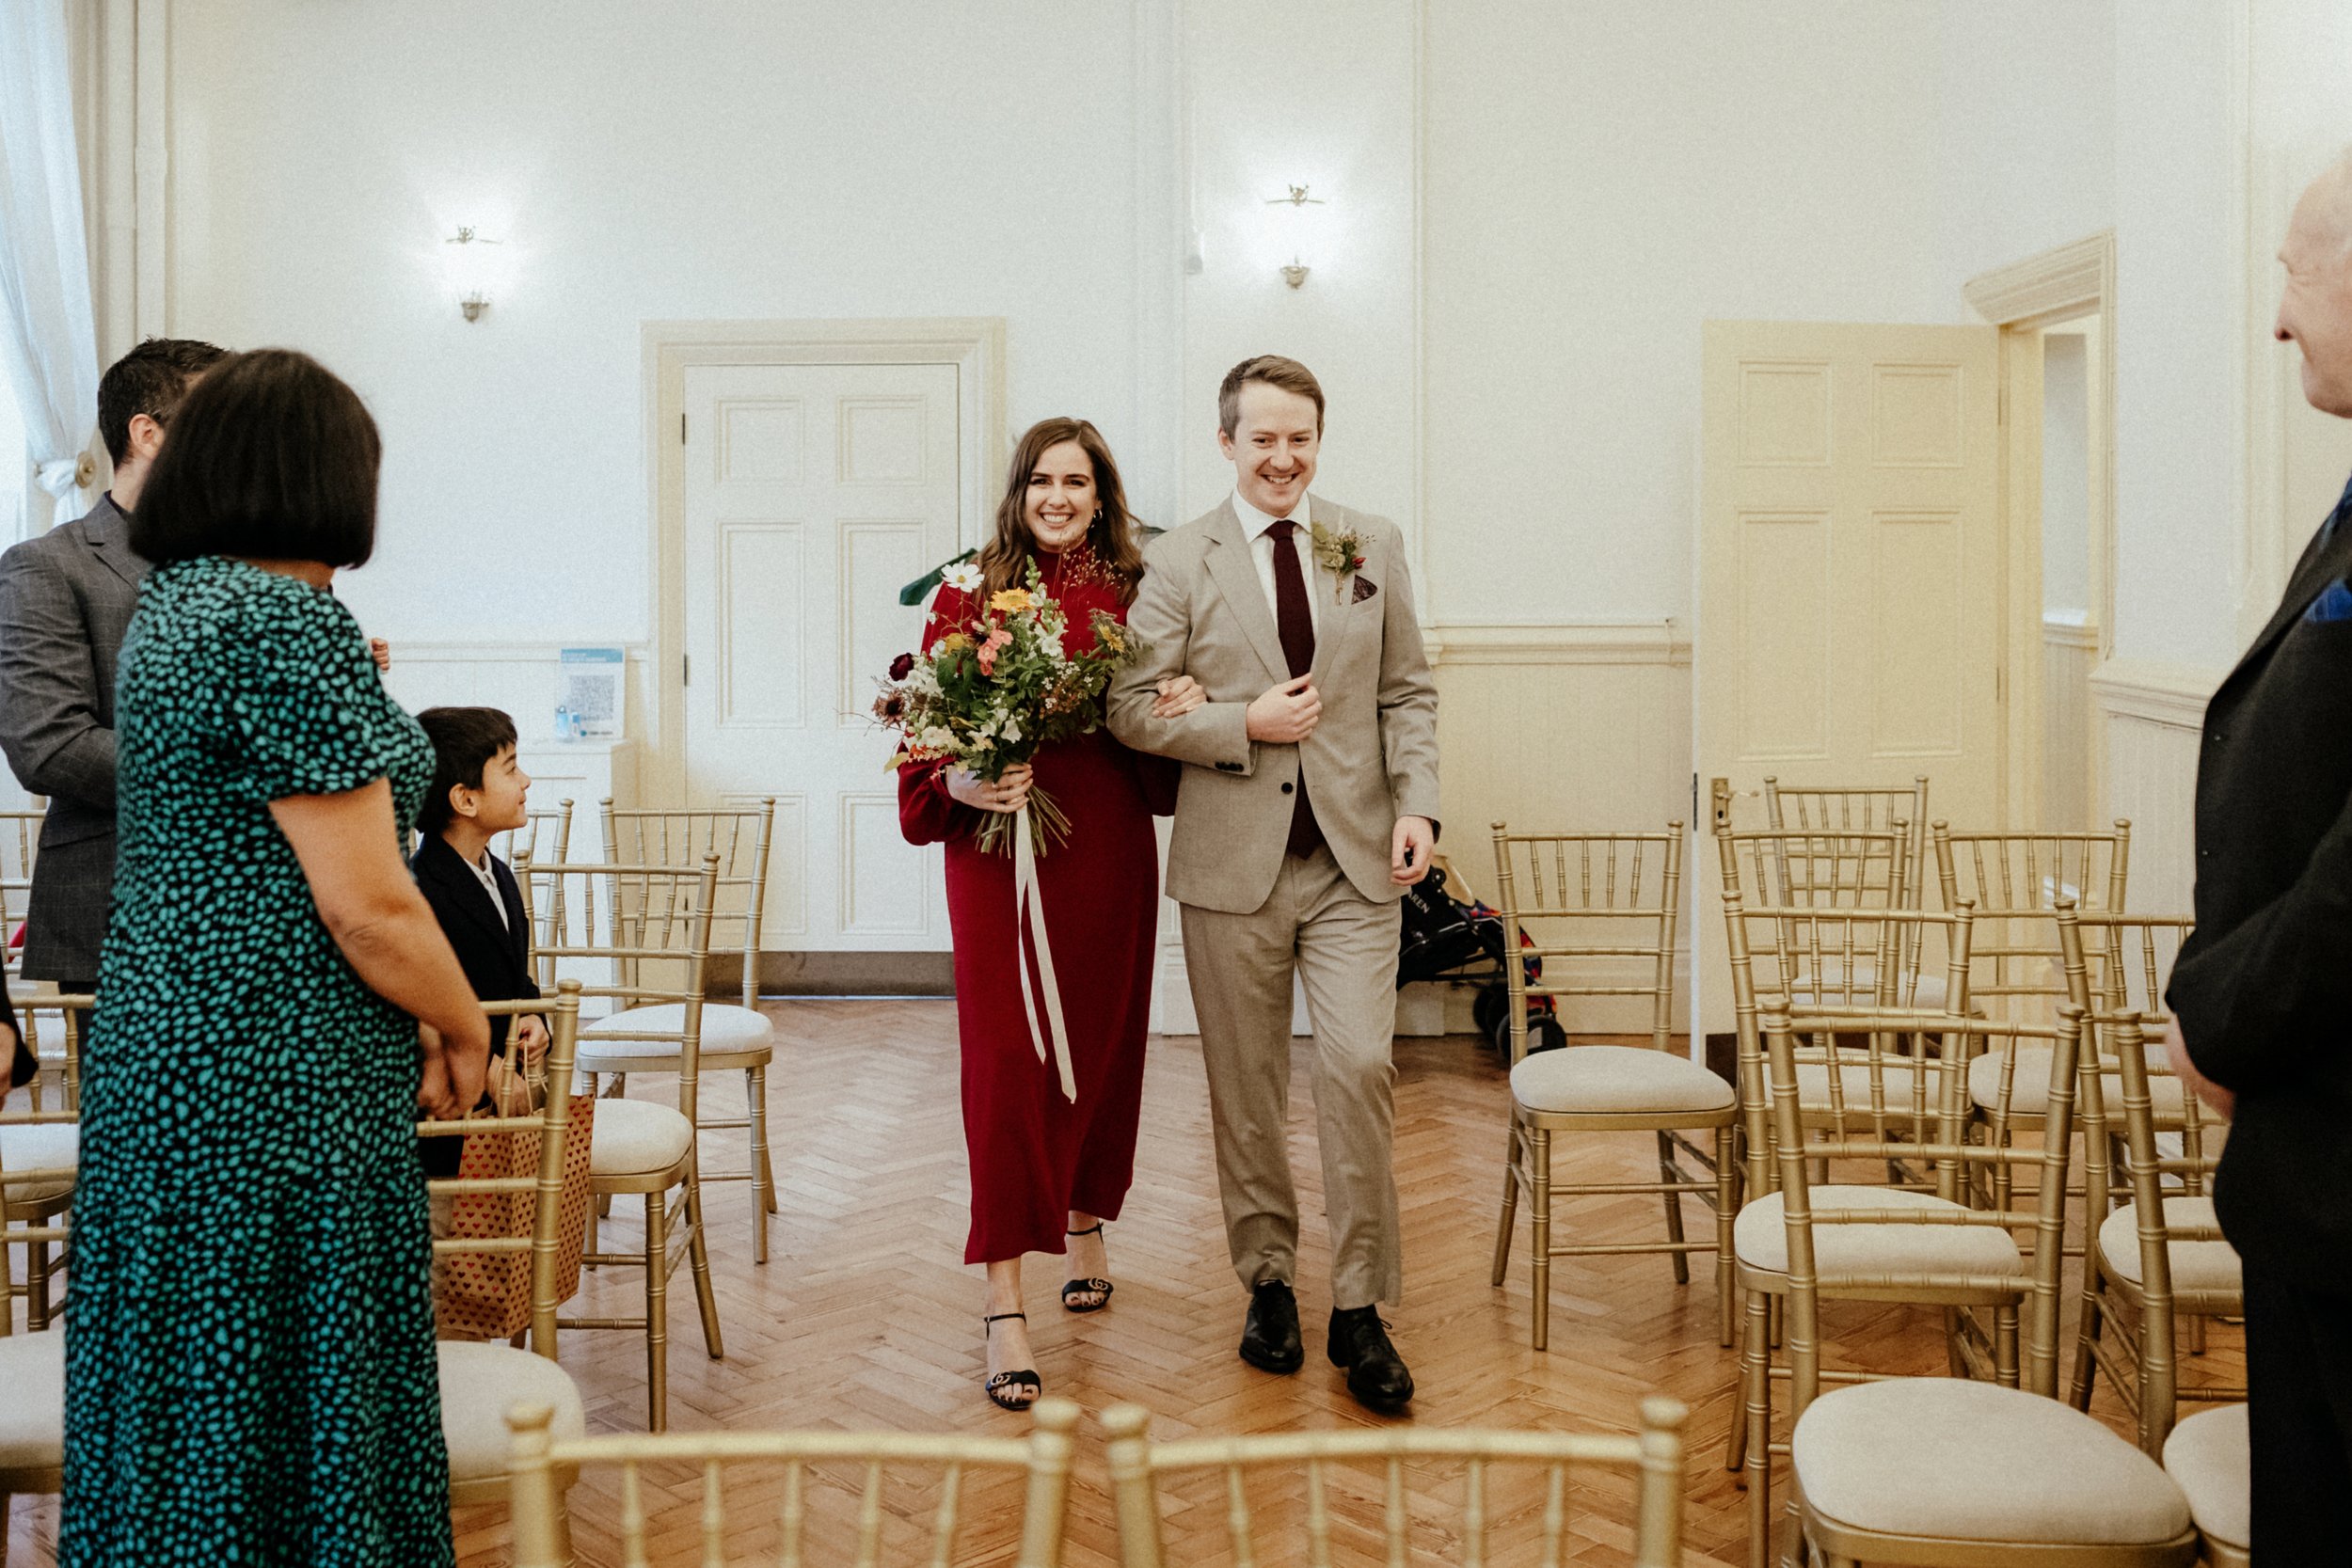 Couple entering their wedding ceremony in The Regency Room